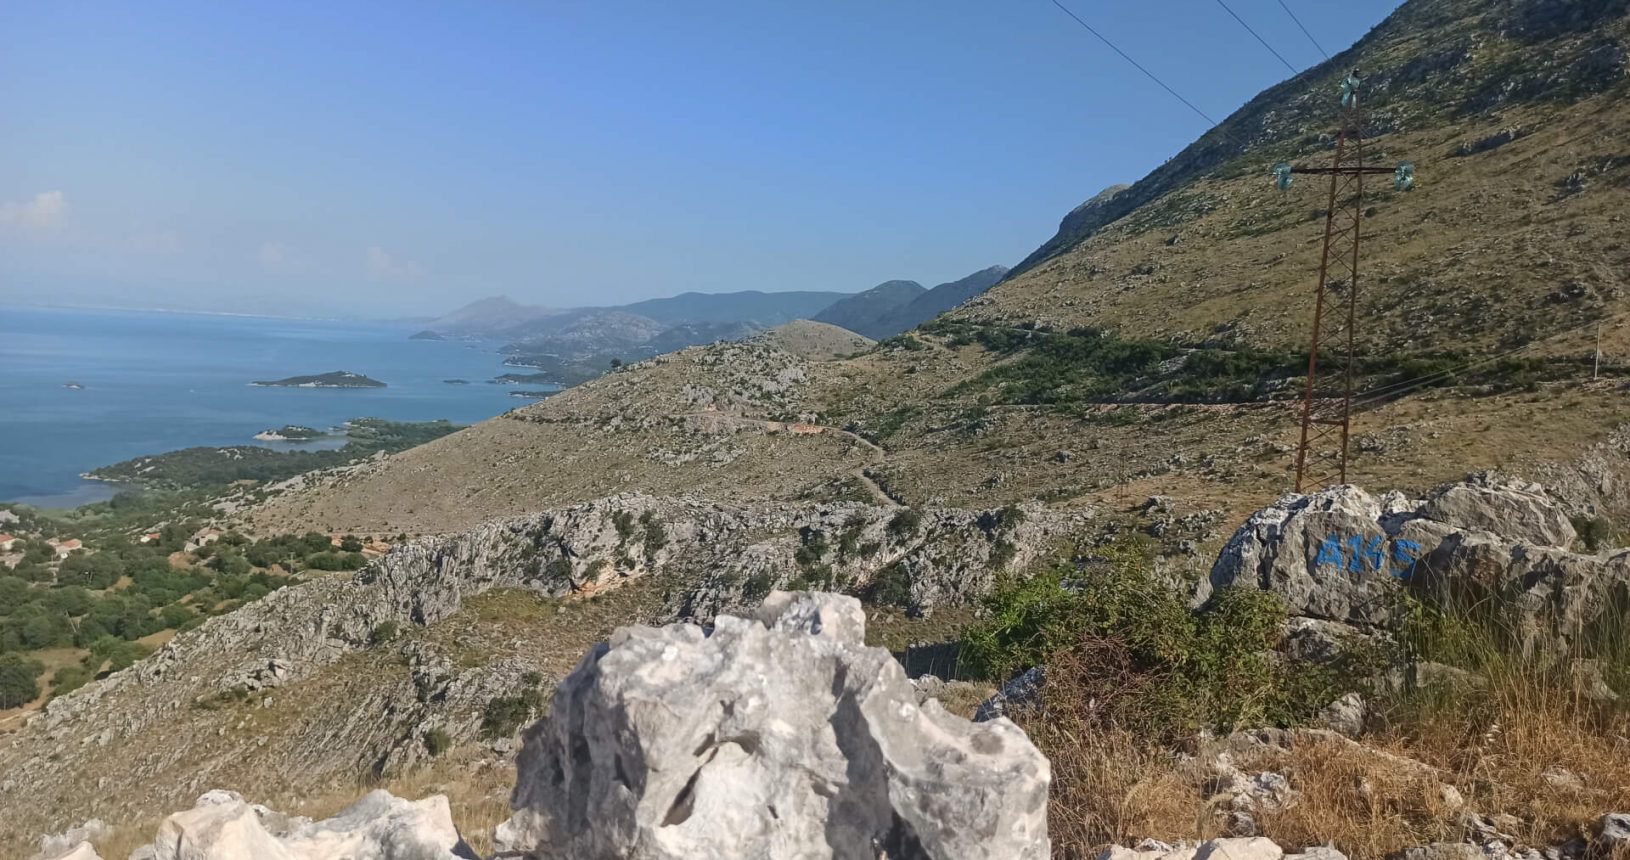 Lake mountains view from behind the rocks . Viewpoint Donji Murici